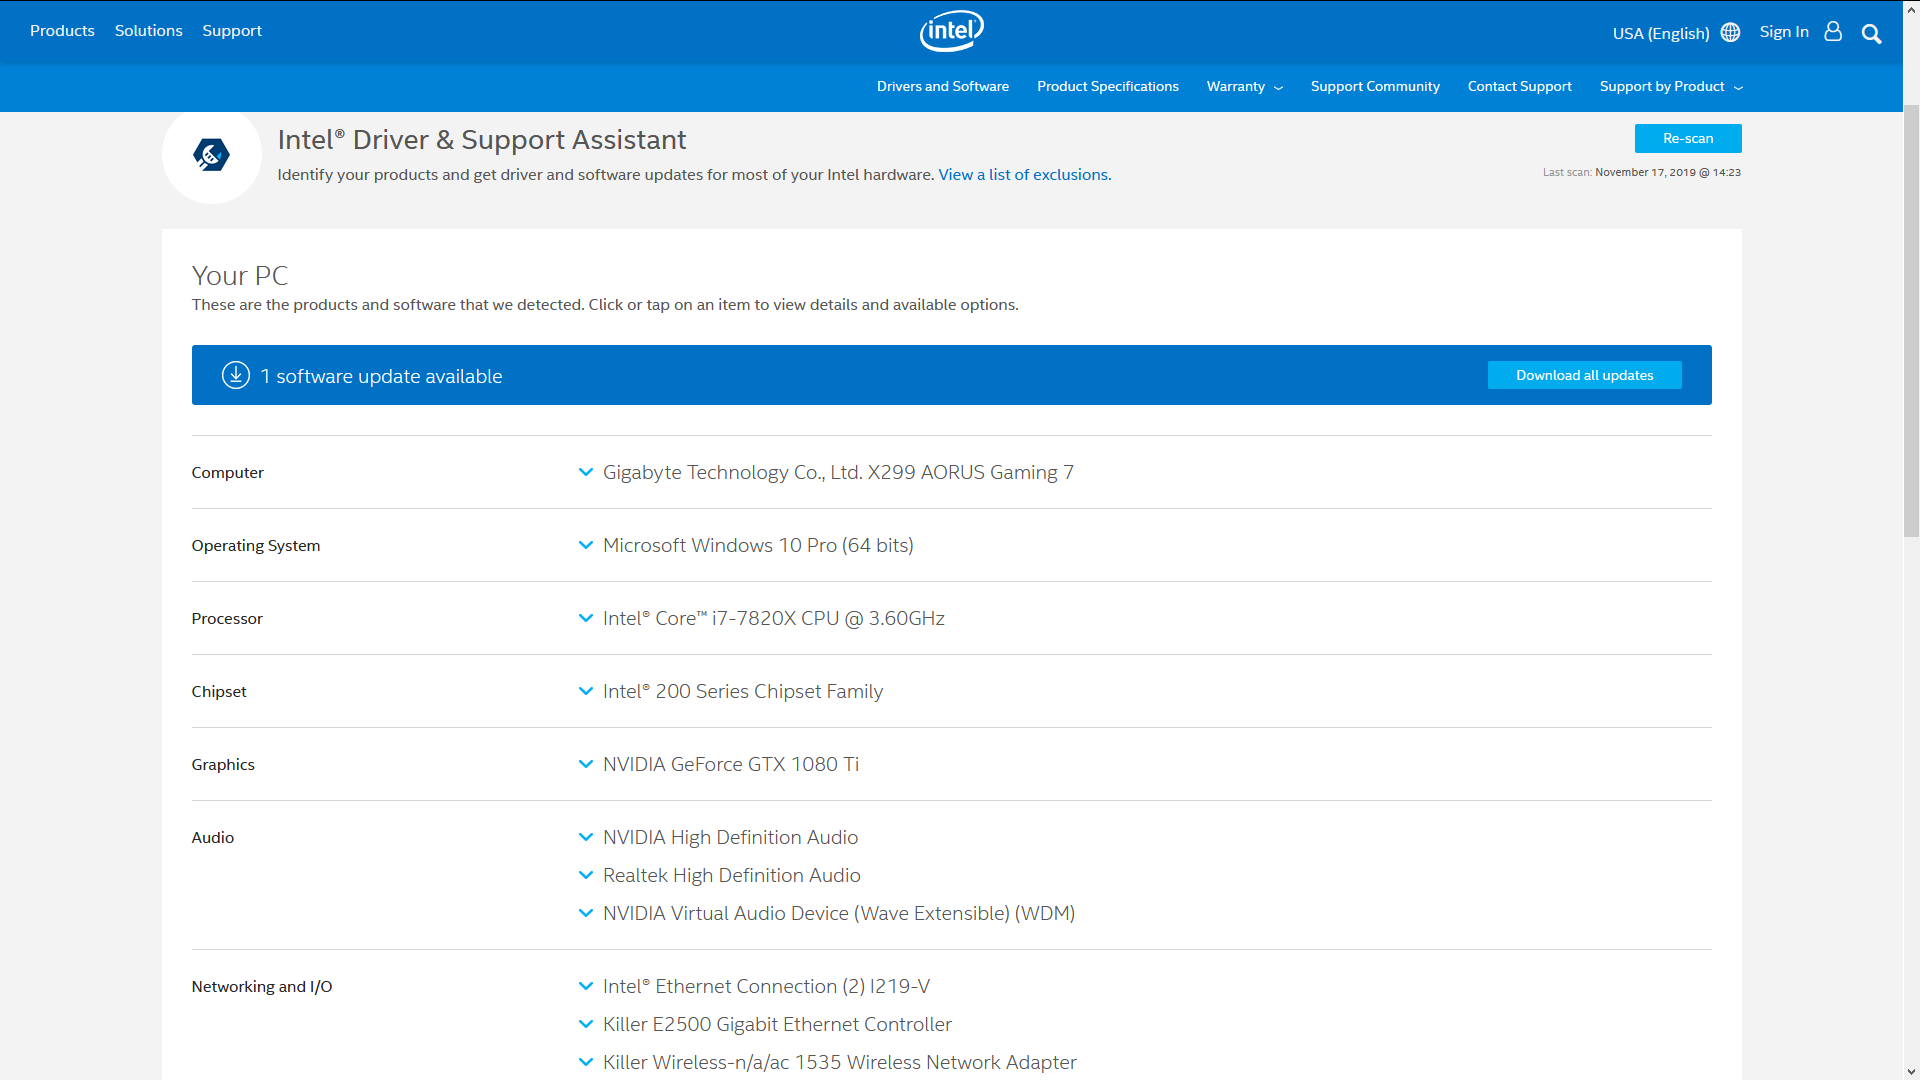 intel driver support